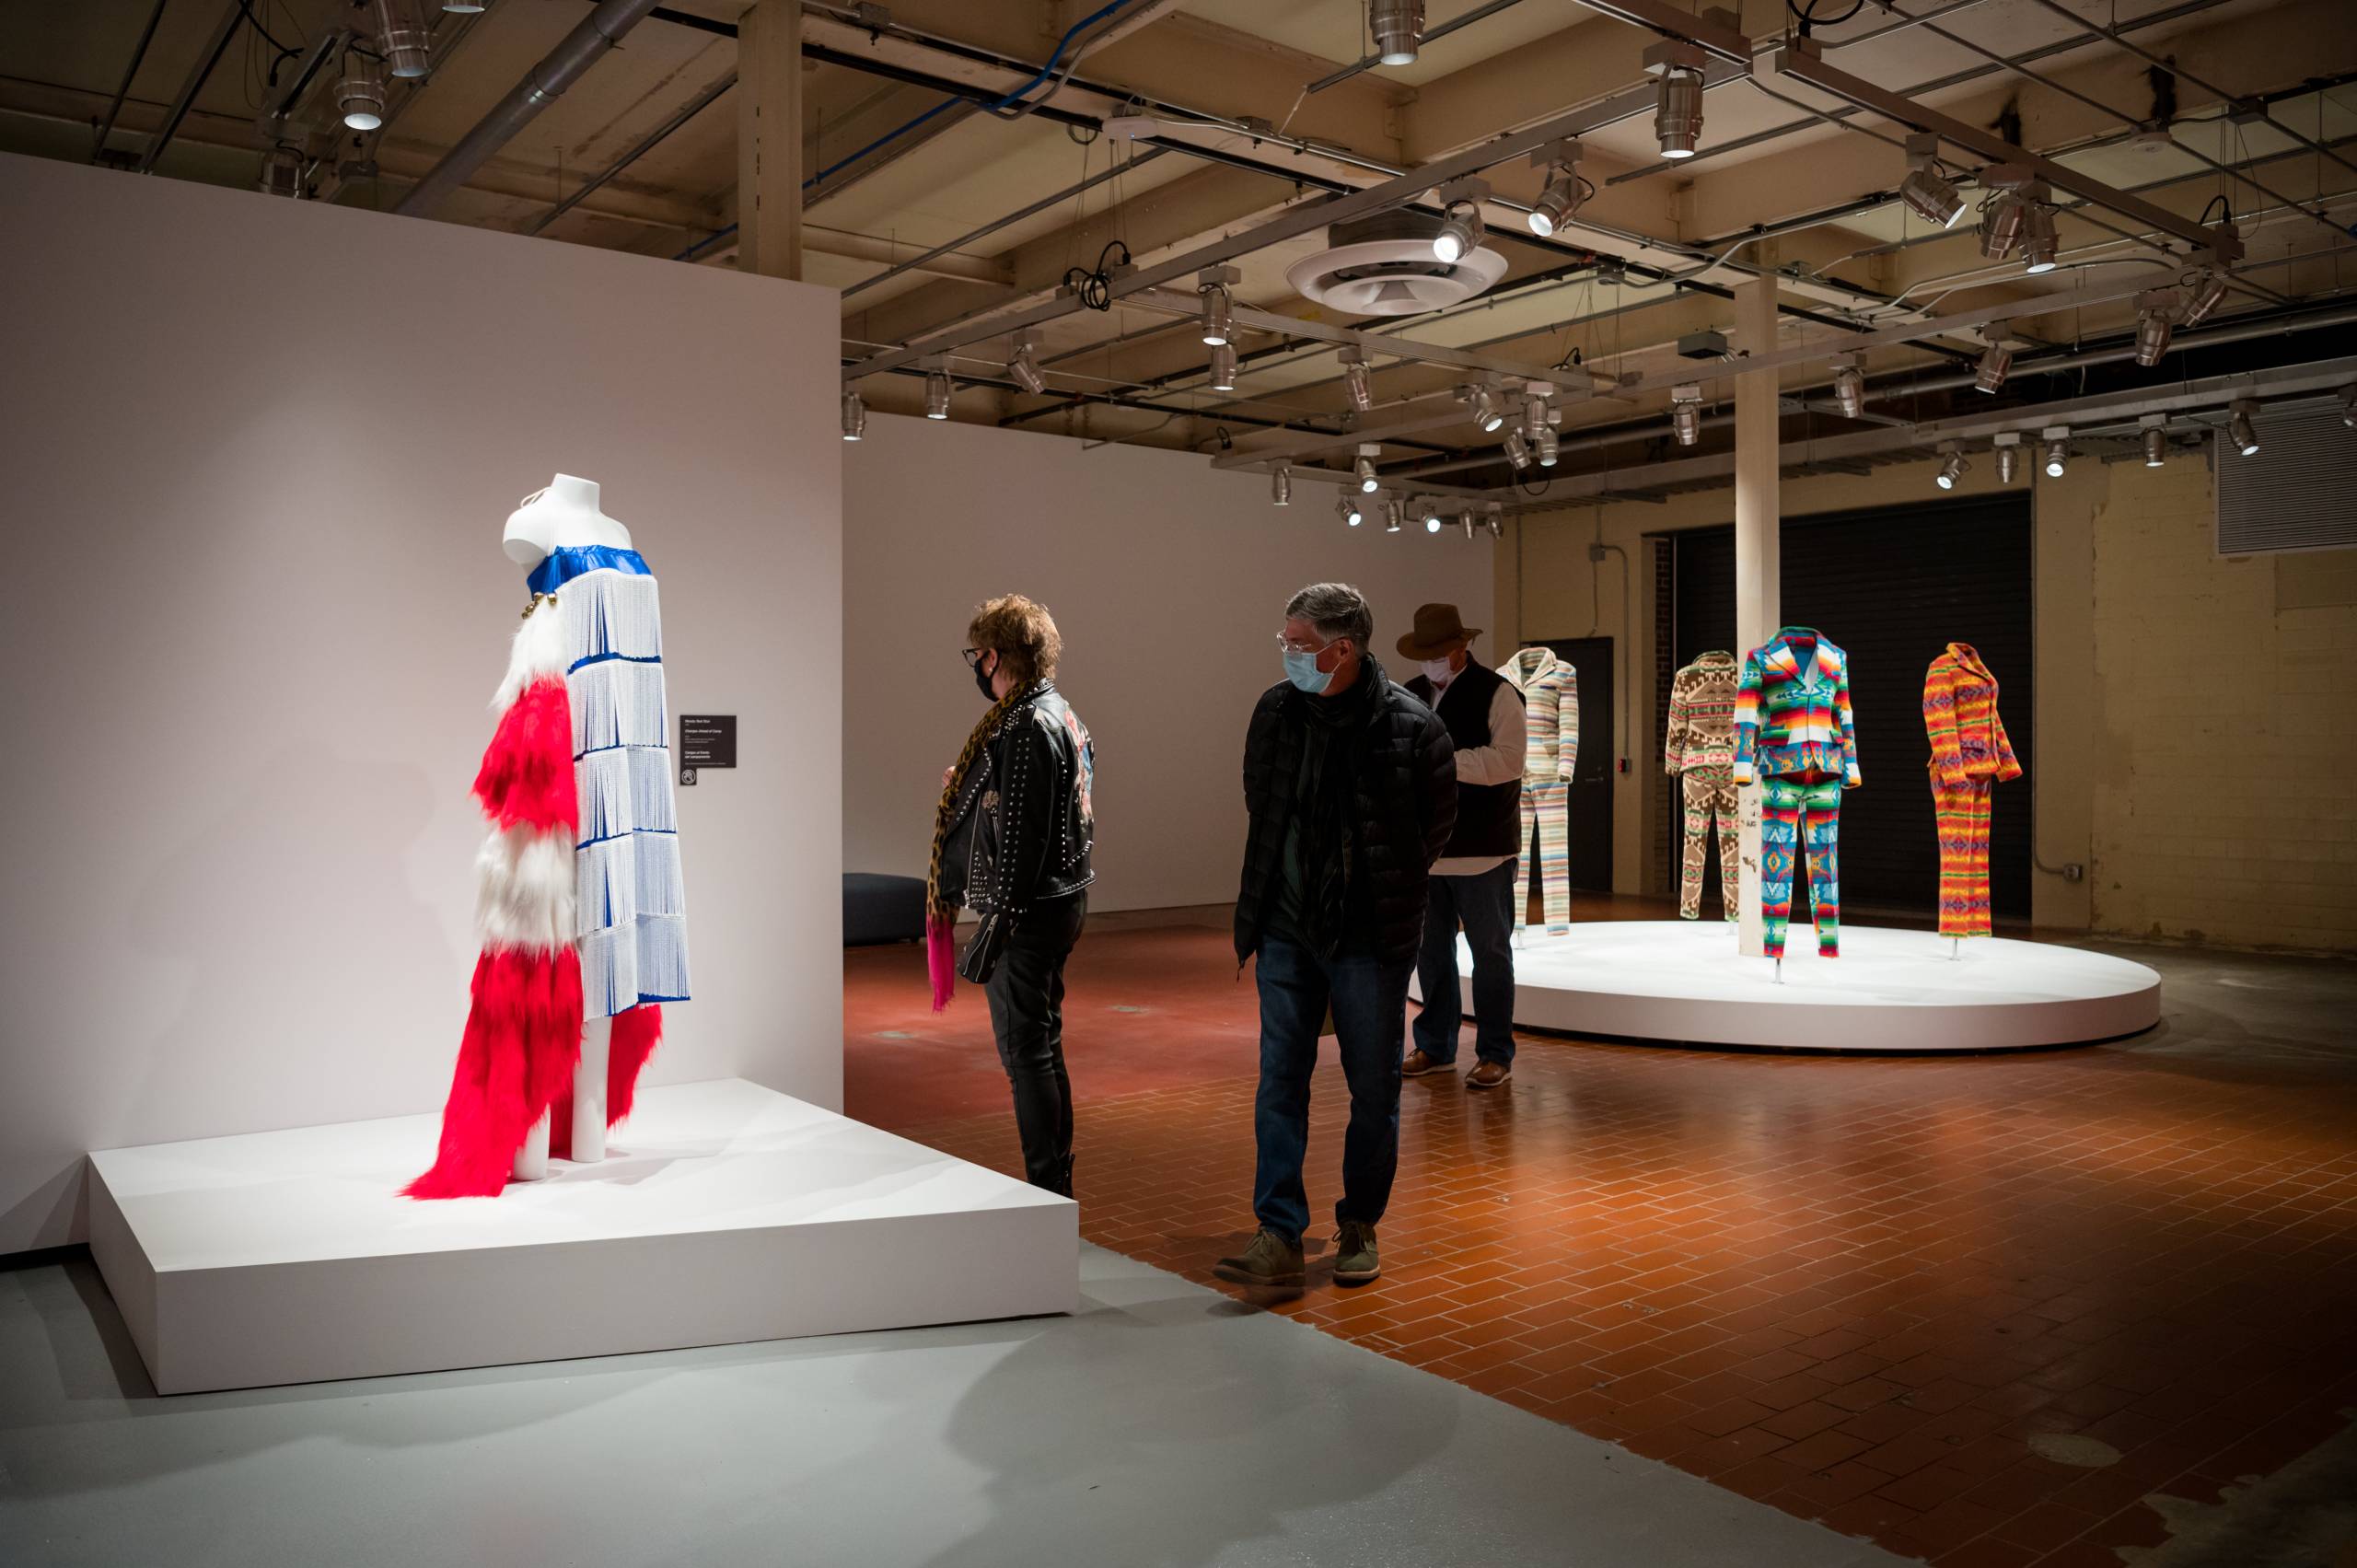 People walking through the galleries and looking at colorful dresses and suits on pedestals